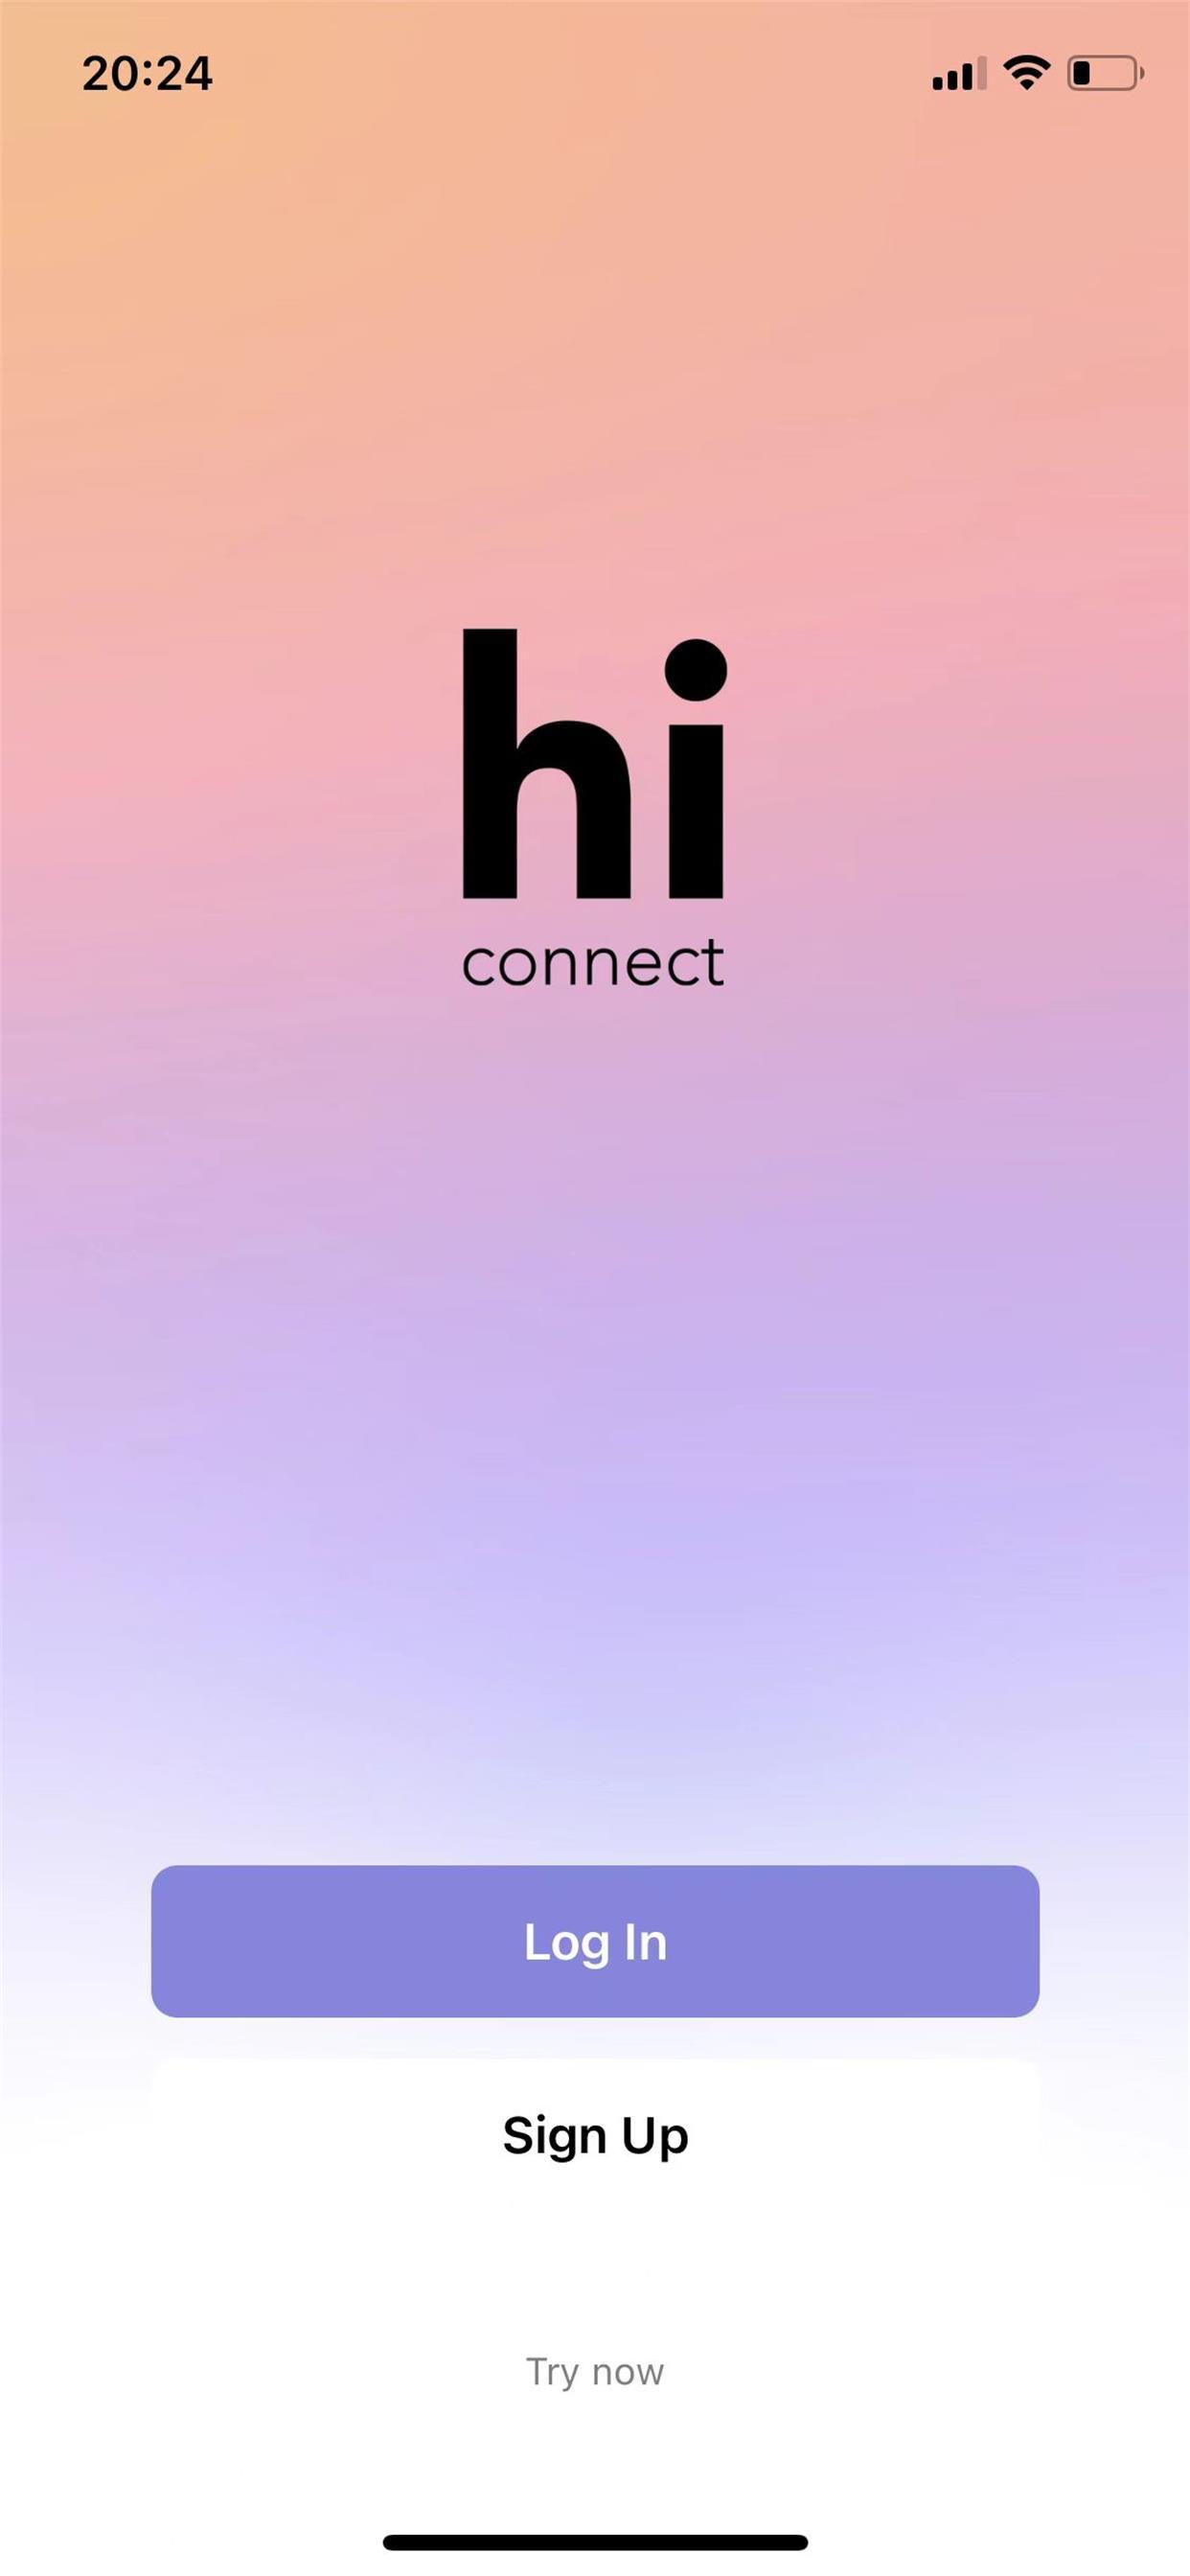 Him connect. Fast meet chat dating Love.